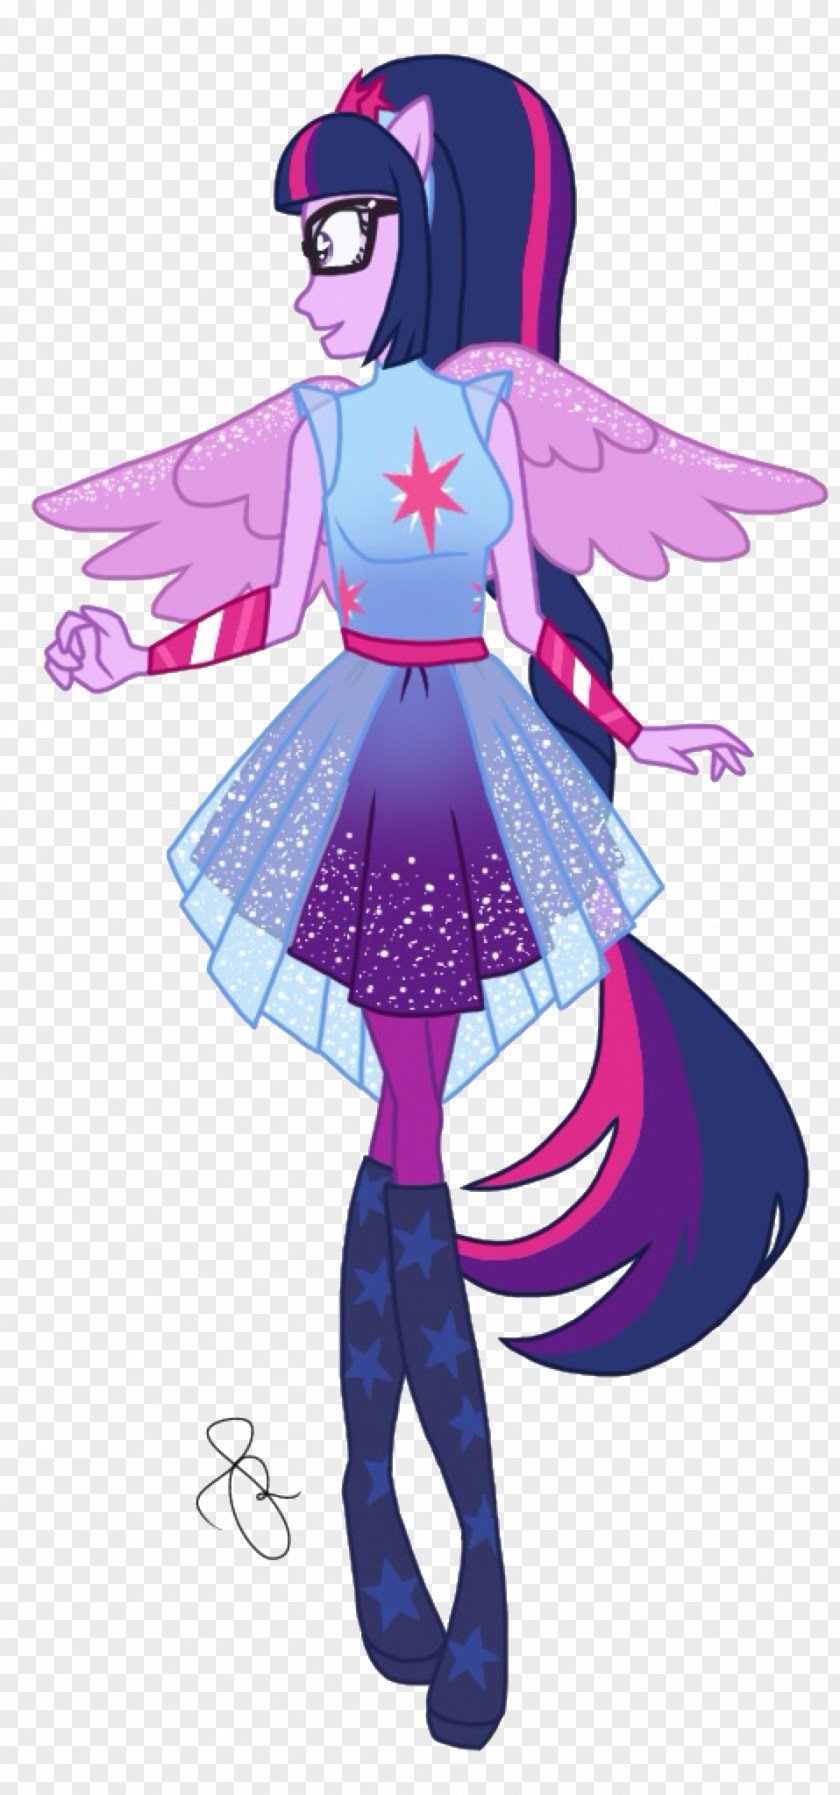 Twilight Sparkle Sunset Shimmer My Little Pony: Equestria Girls PNG